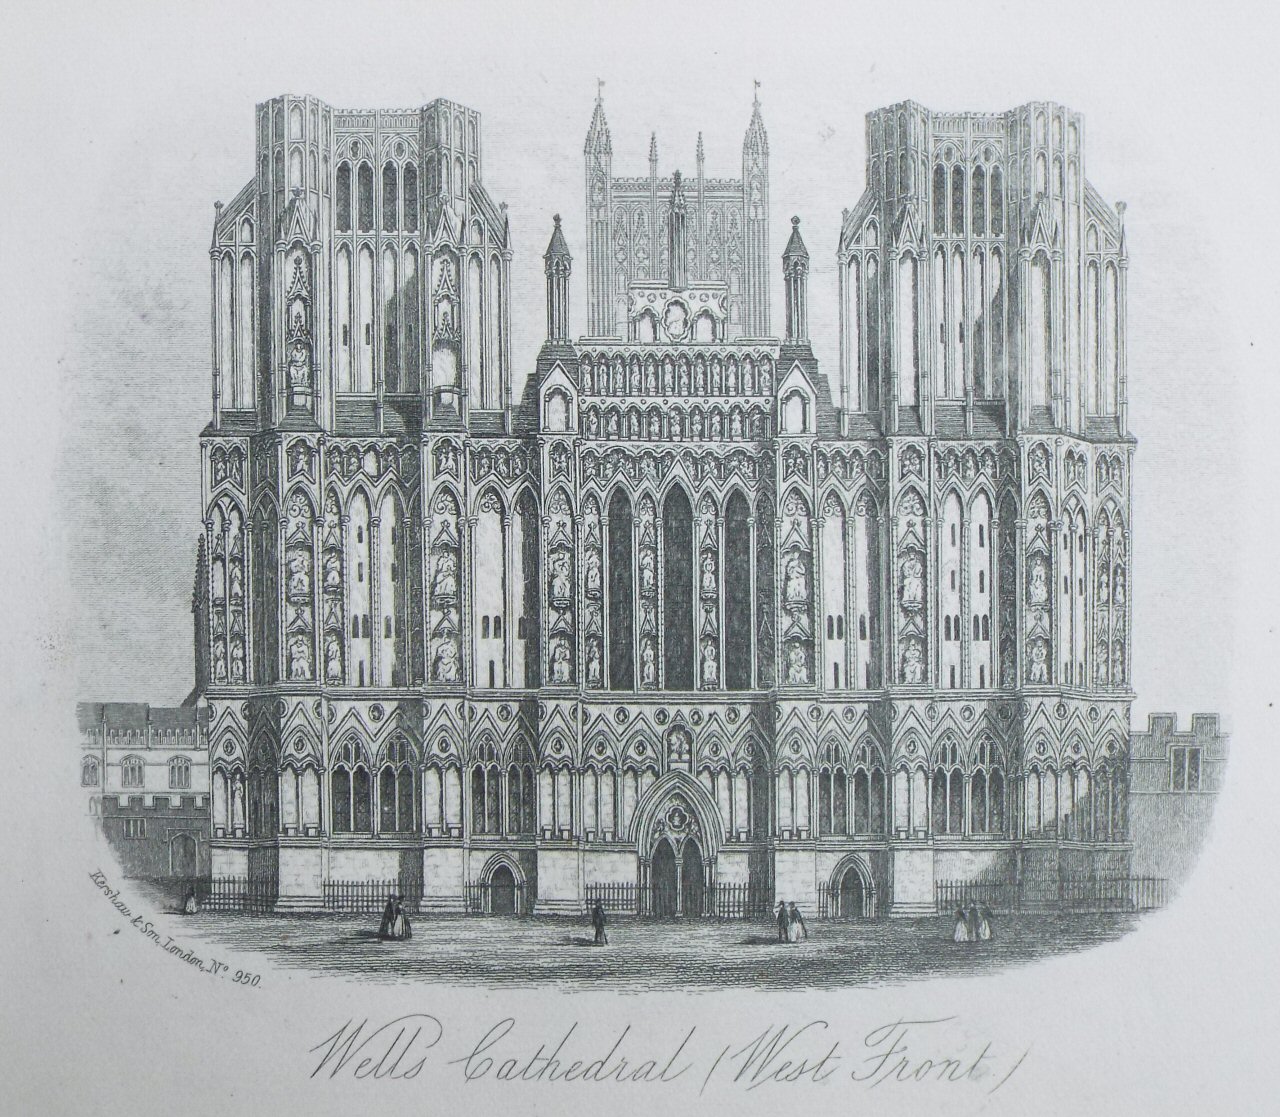 Steel Vignette - Wells Cathedral (West Front) - Kershaw